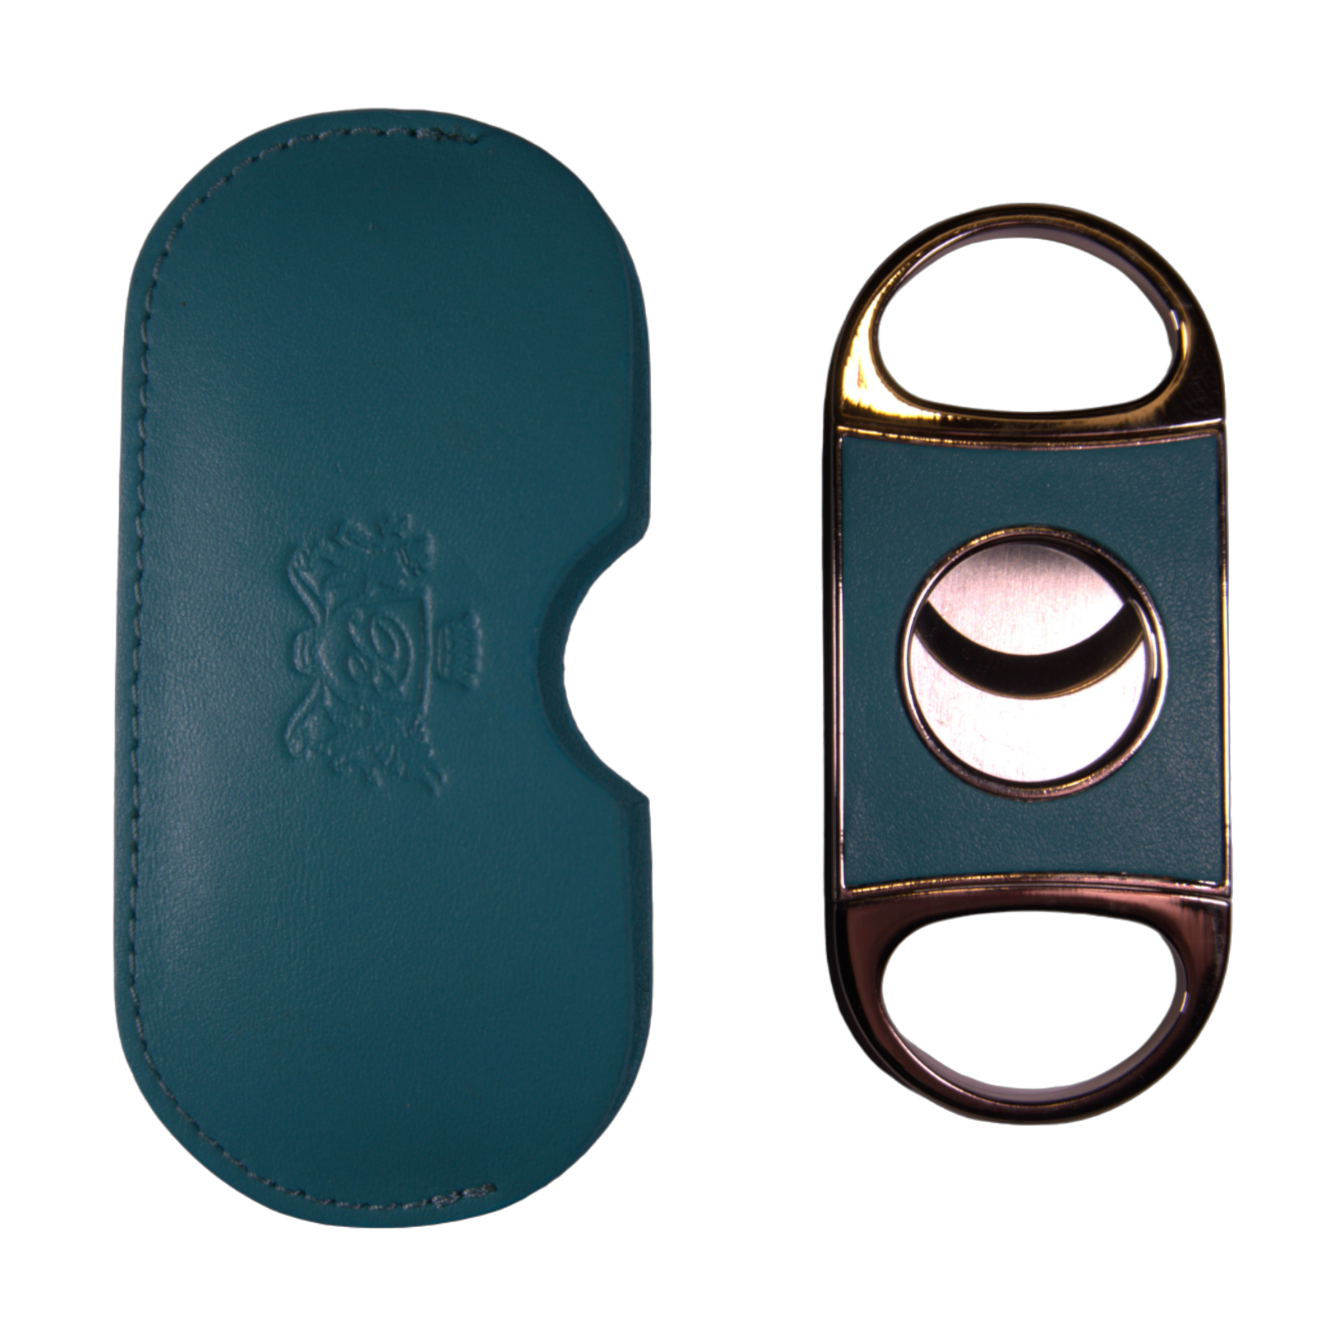 Brizard & Co Cutter "Double Guillotine II" Cigar Cutter - Positano (Turquoise & African Mahogany)